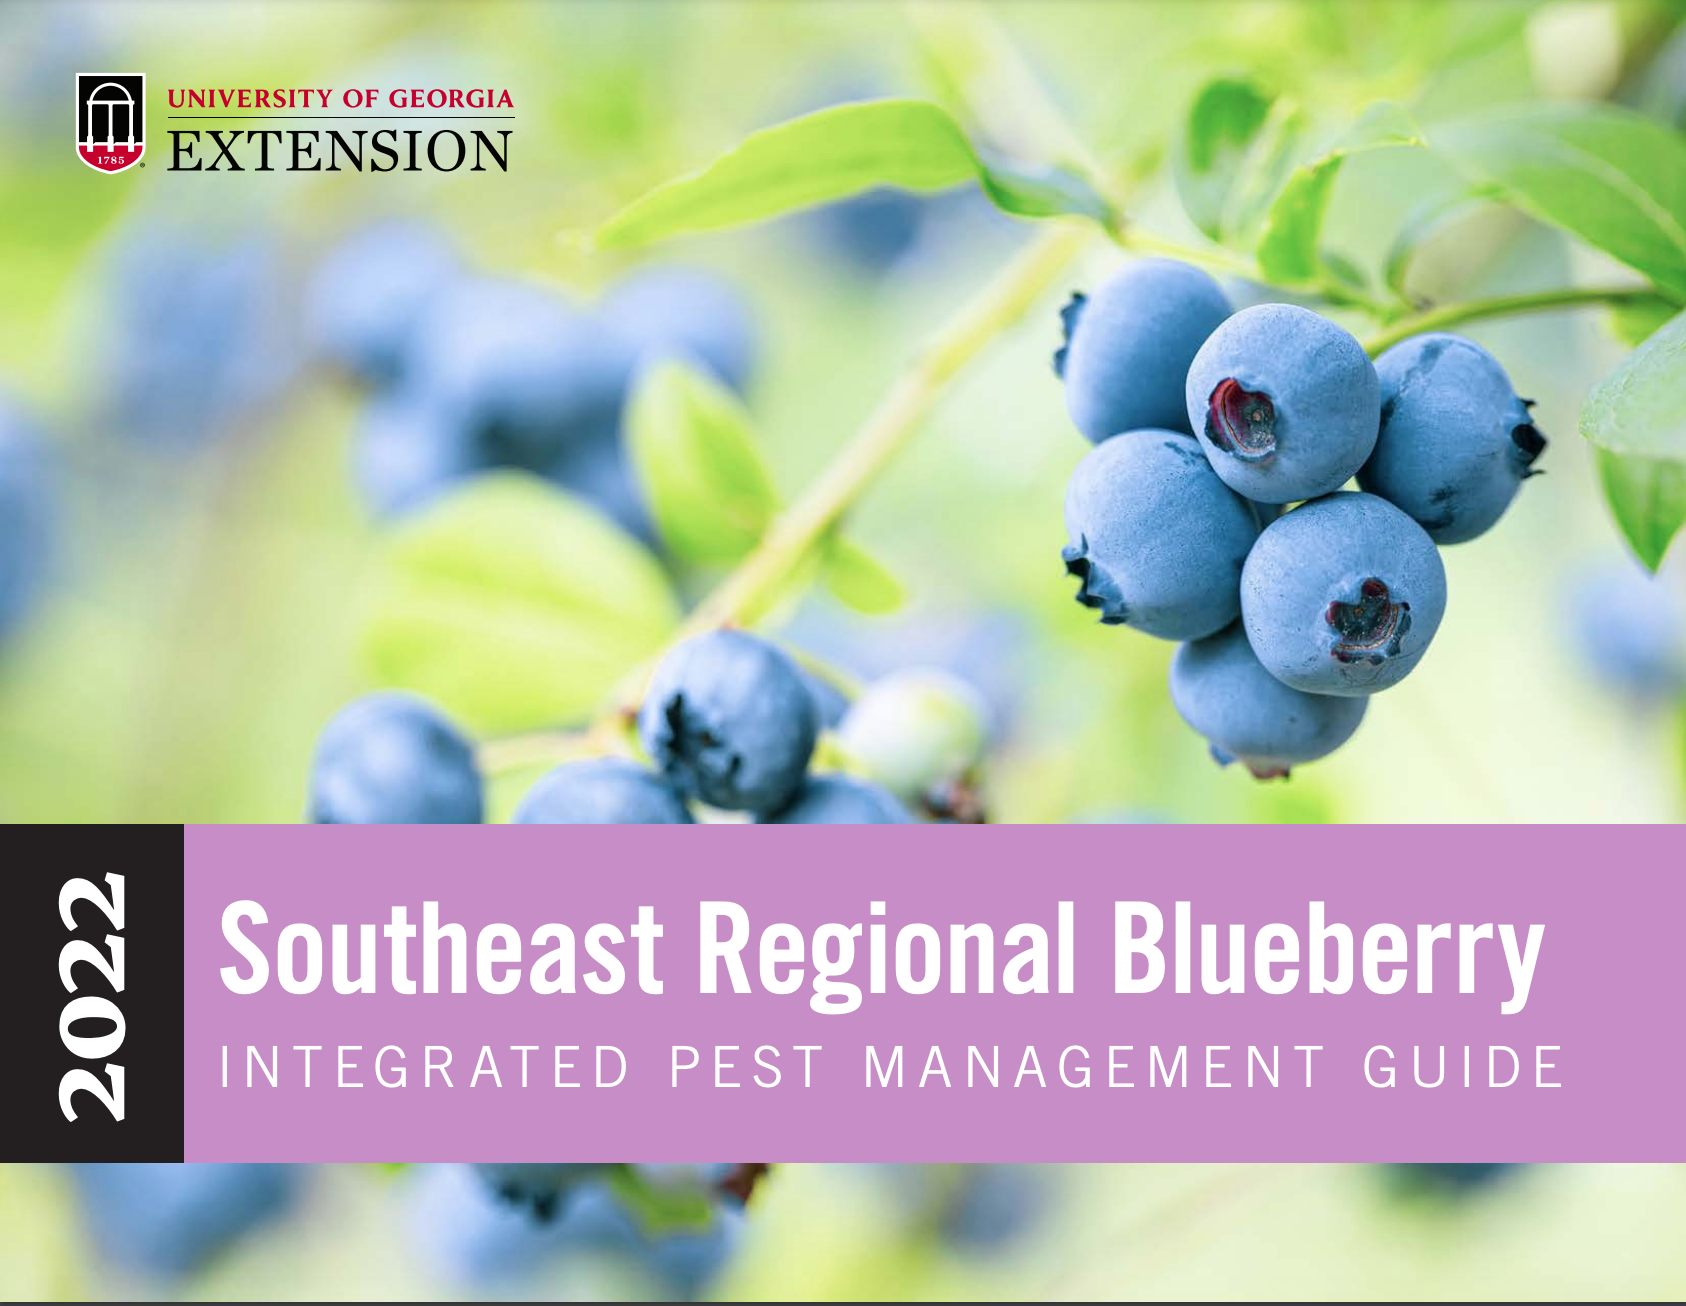 First page of the 2022 southeastern regional blueberry IPM guide